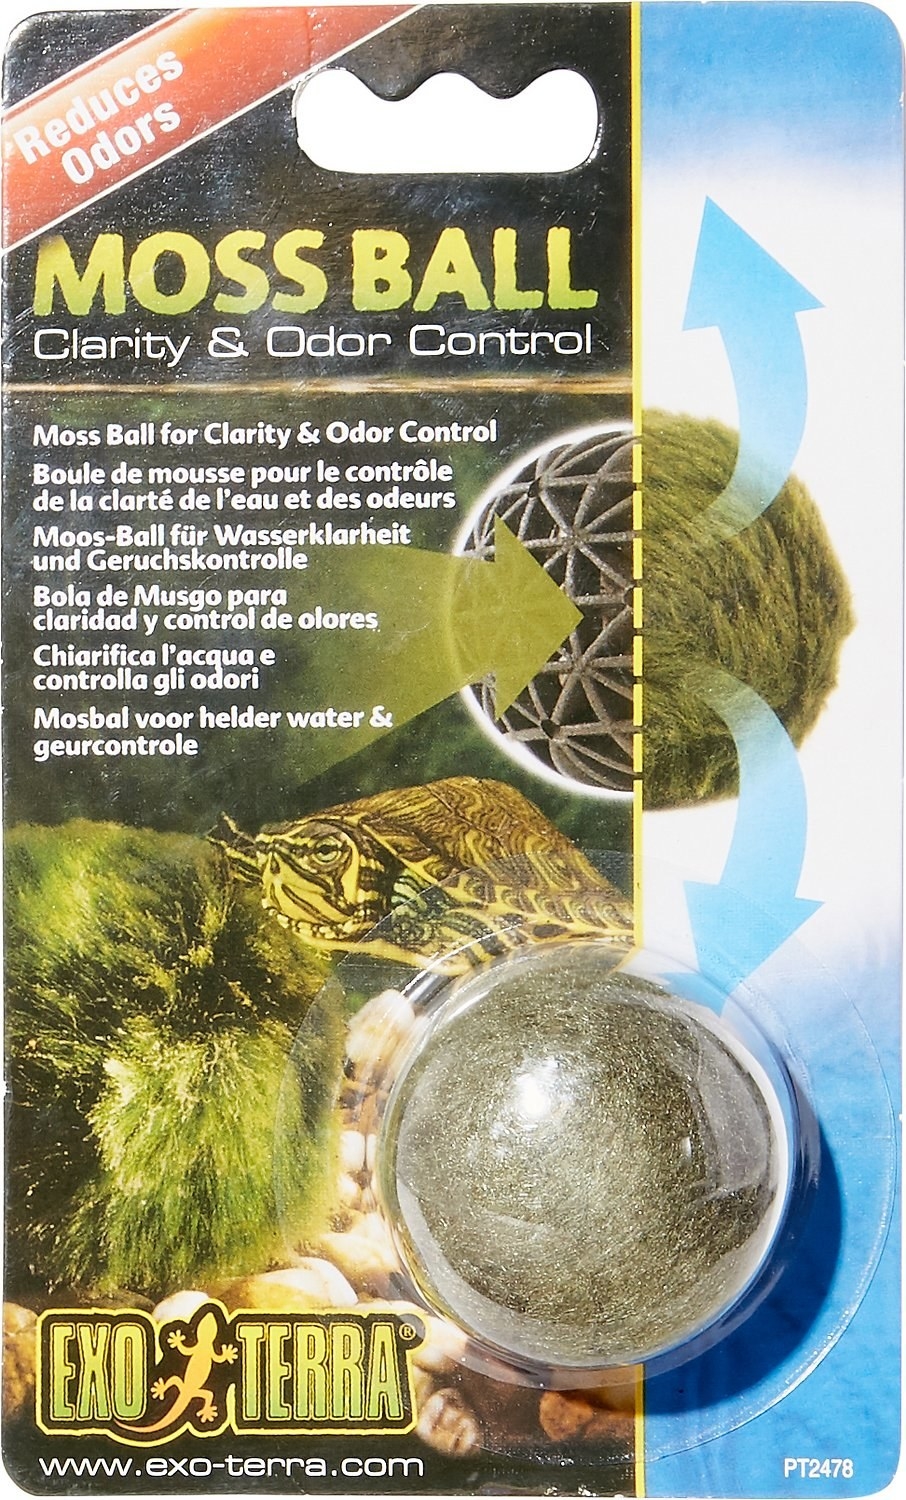 A image of a clarity and odor moss ball for turtles